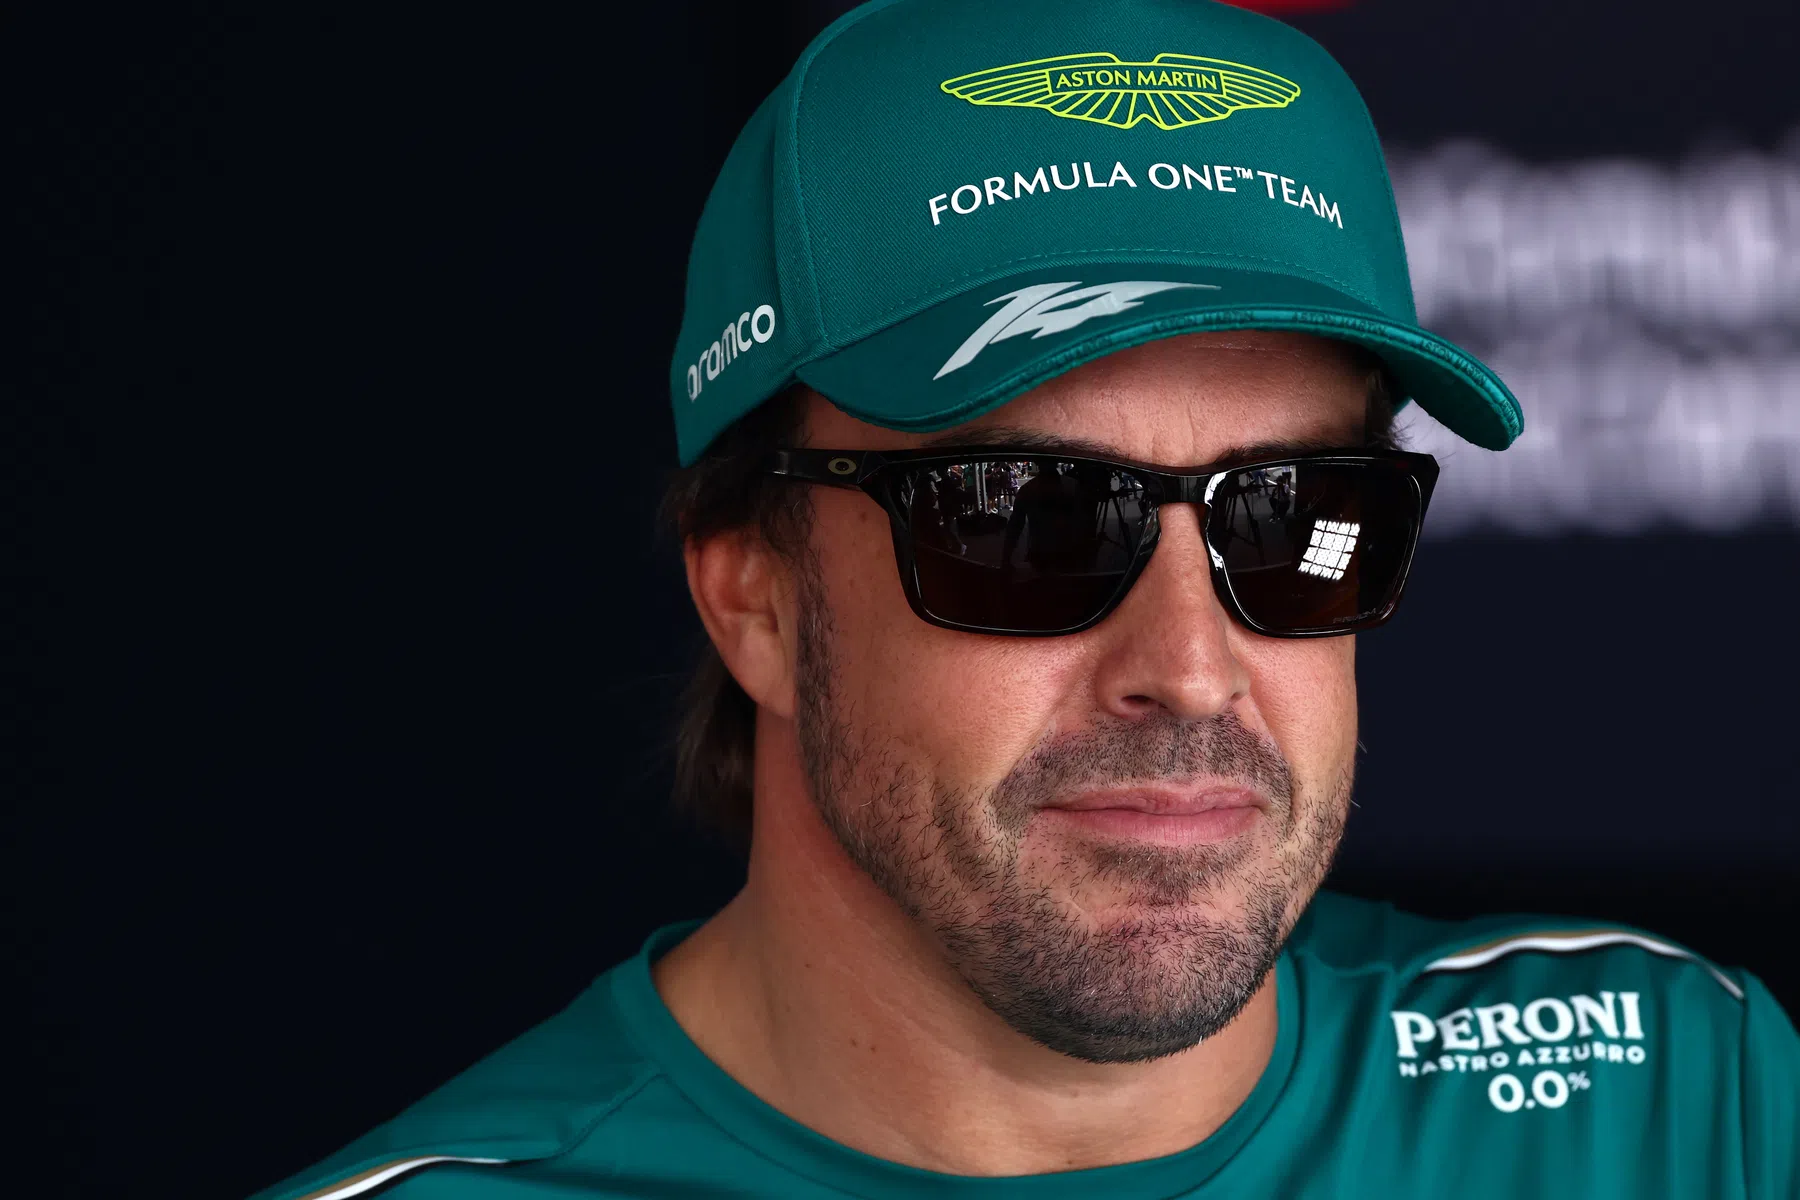 Alonso to Mercedes? 'I am the only world champion who is free'